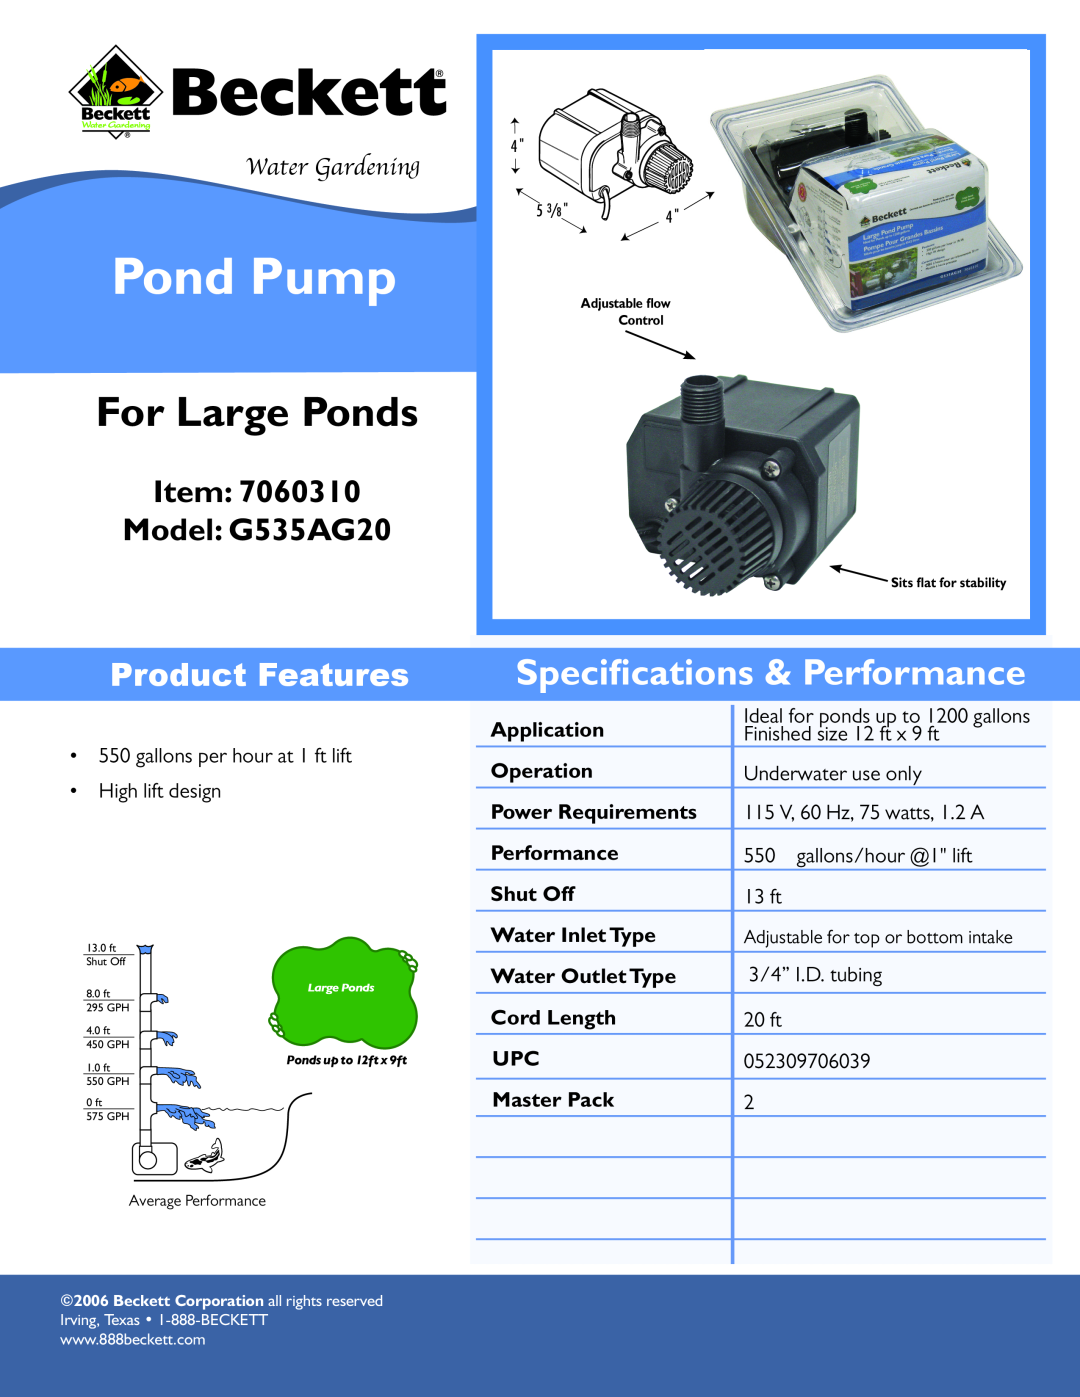 Beckett Water Gardening specifications Pond Pump, For Large Ponds, Speciﬁcations & Performance, Model G535AG20 